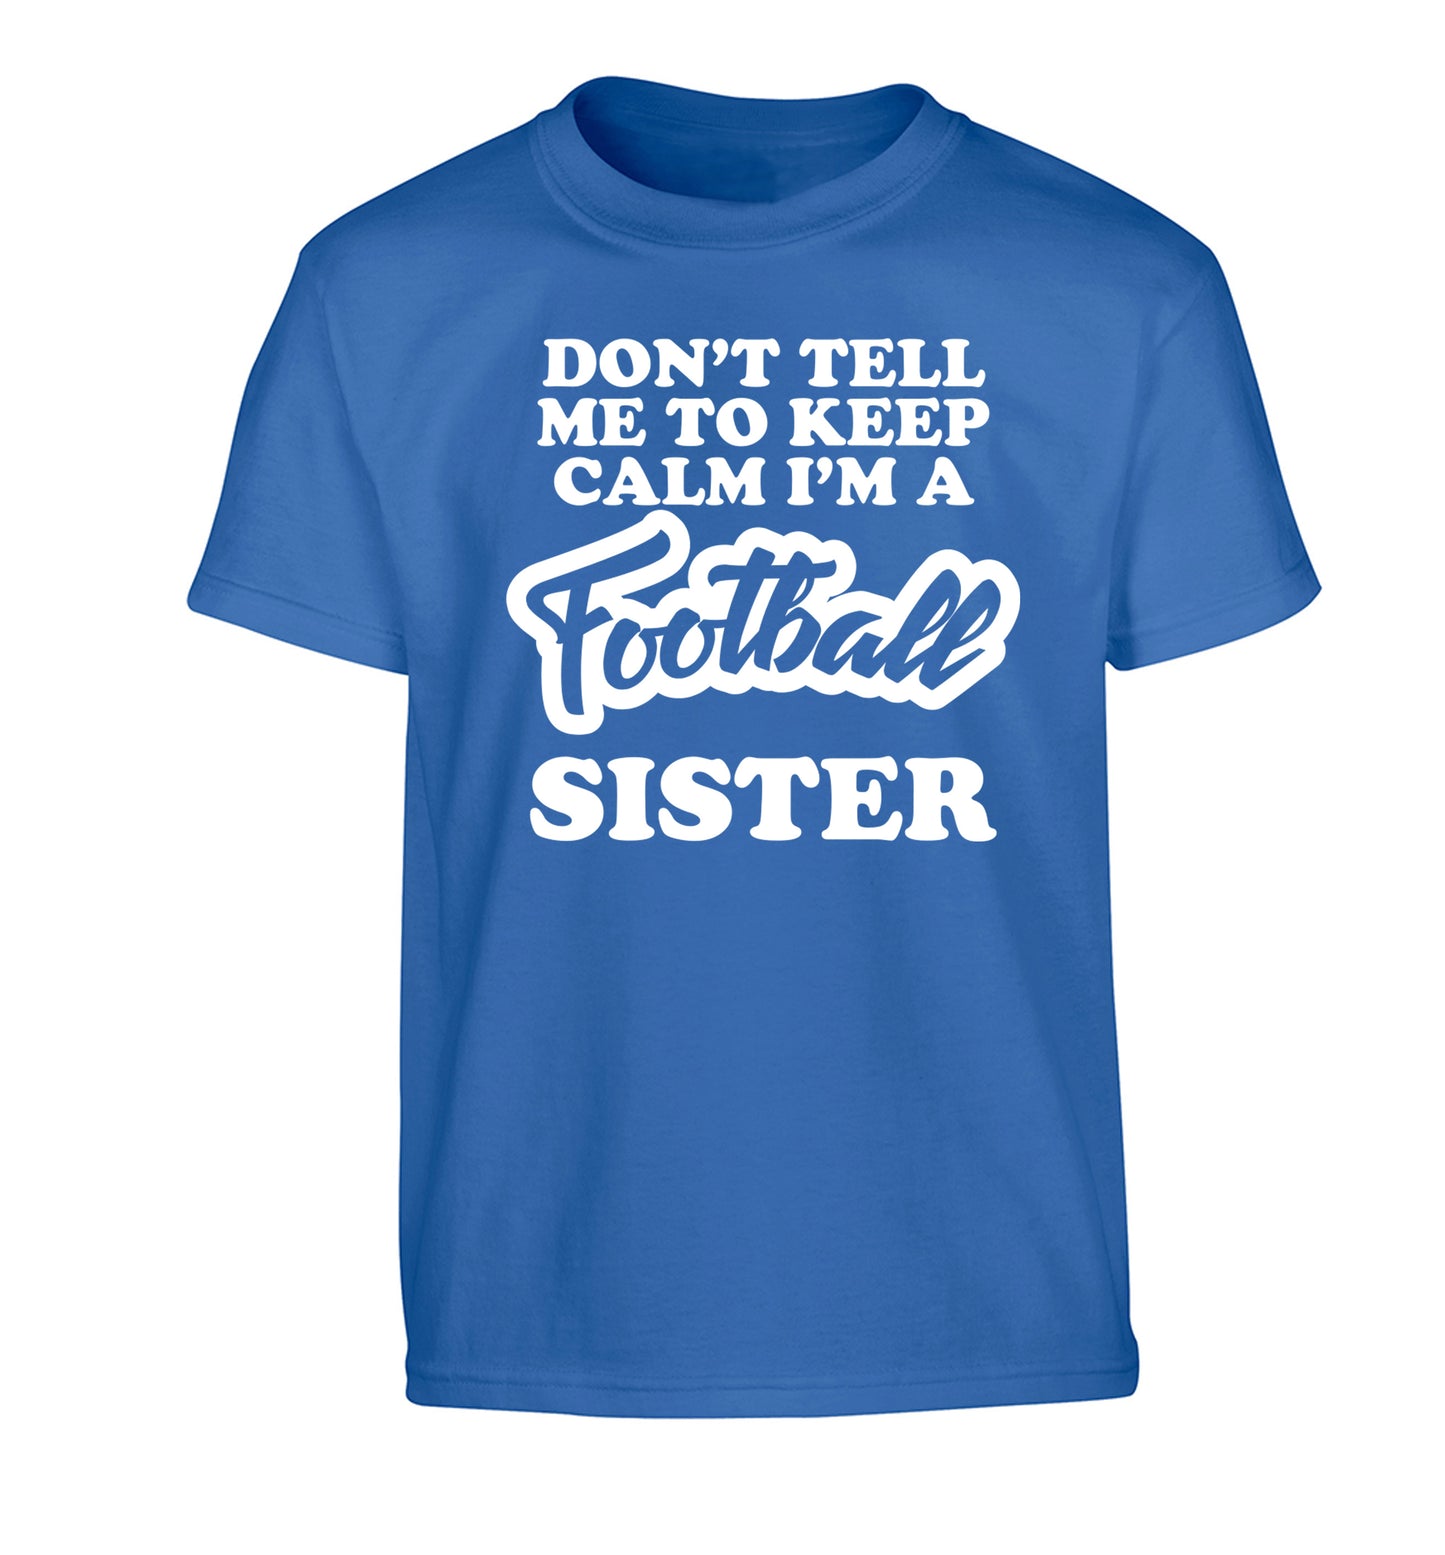 Don't tell me to keep calm I'm a football sister Children's blue Tshirt 12-14 Years